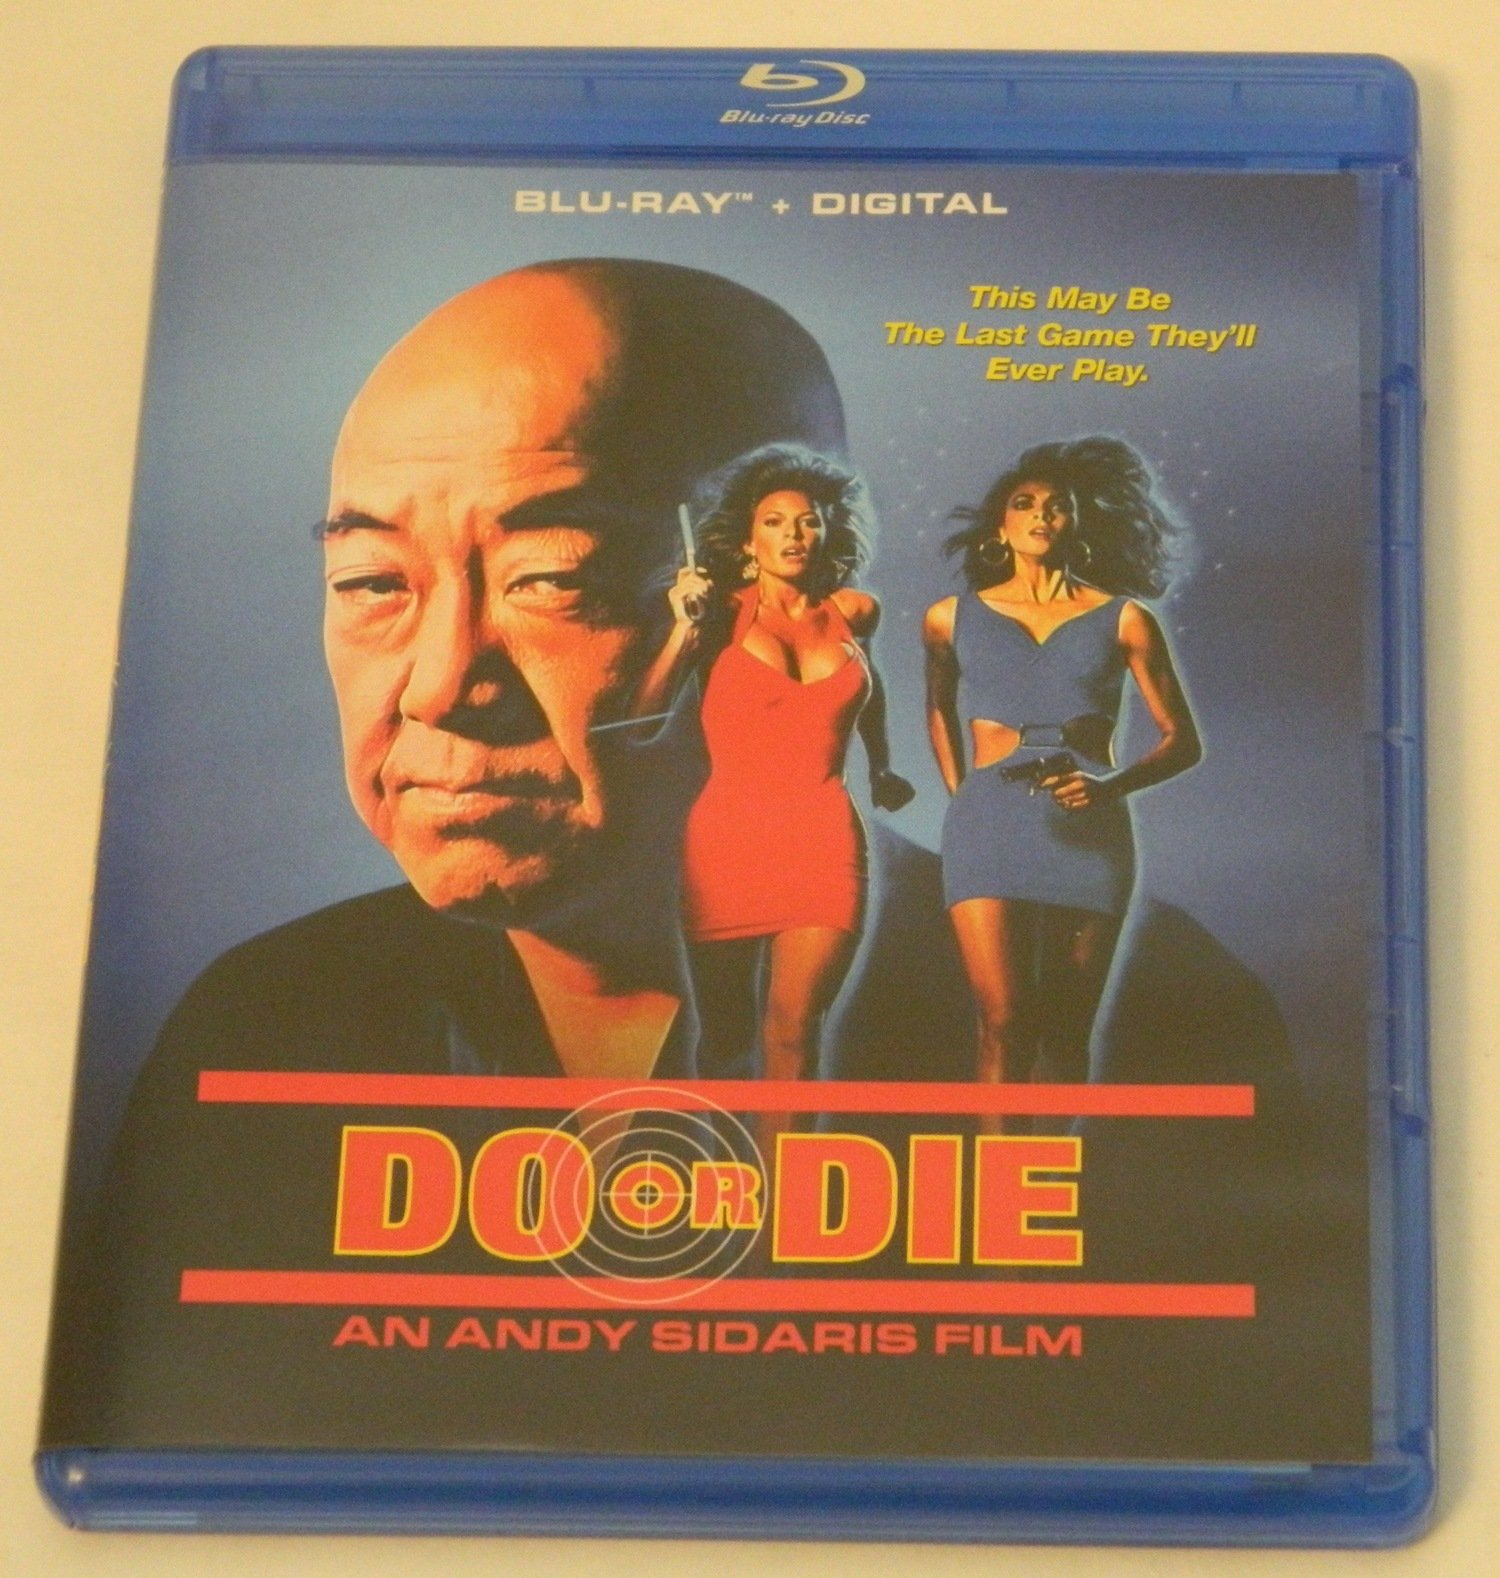 Do or Die (1991) Blu-ray Review